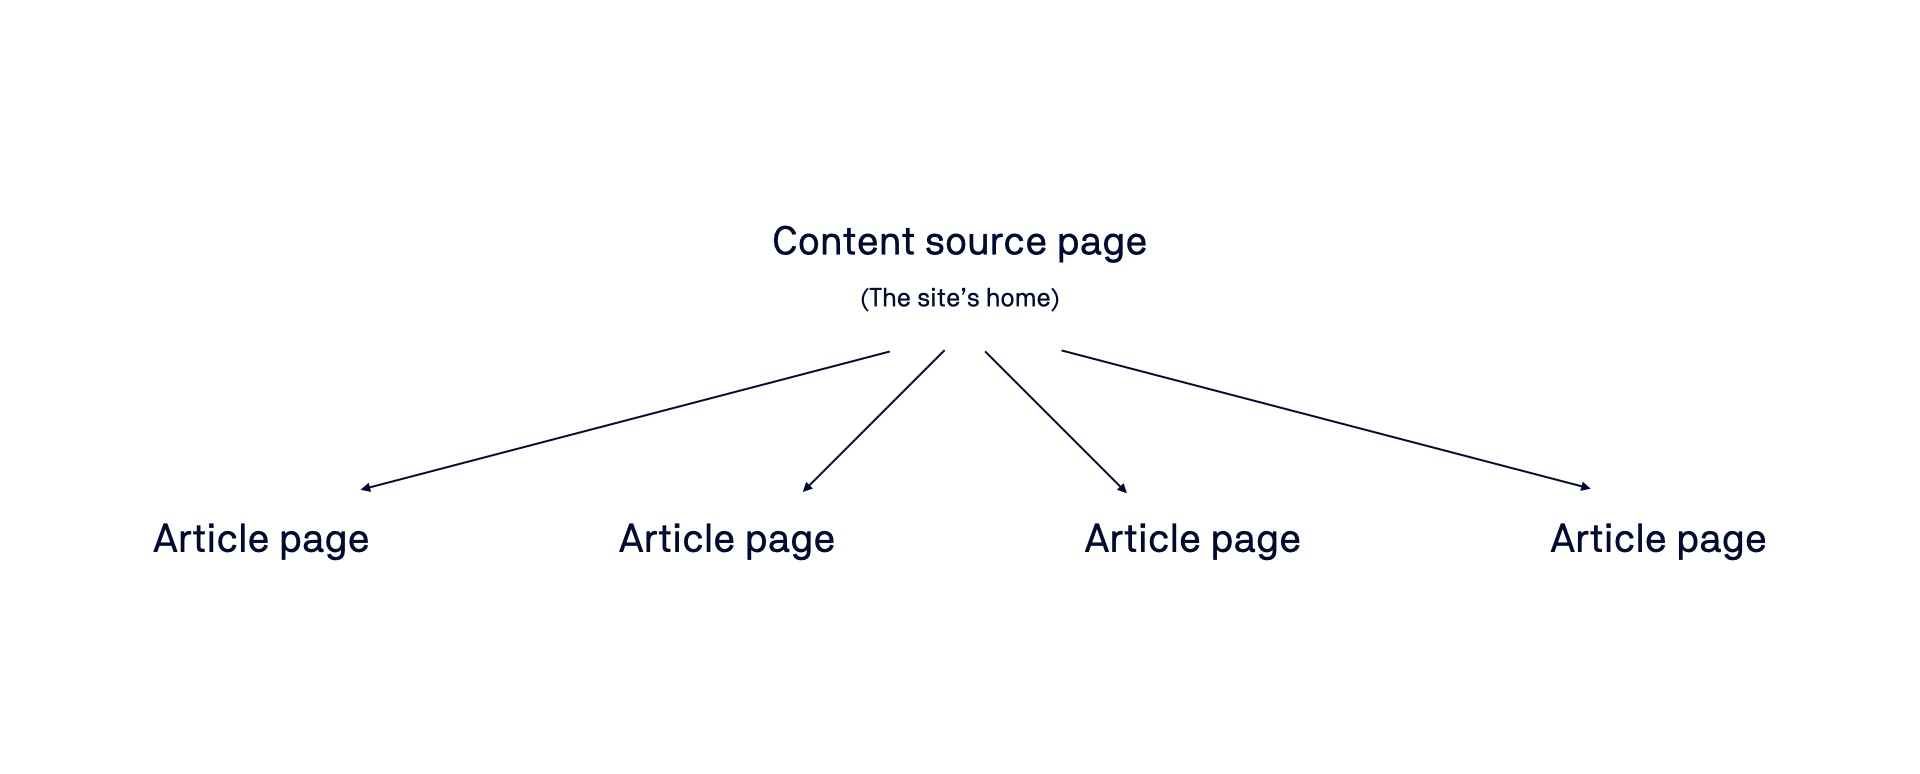 Viewport site structure with only one content source